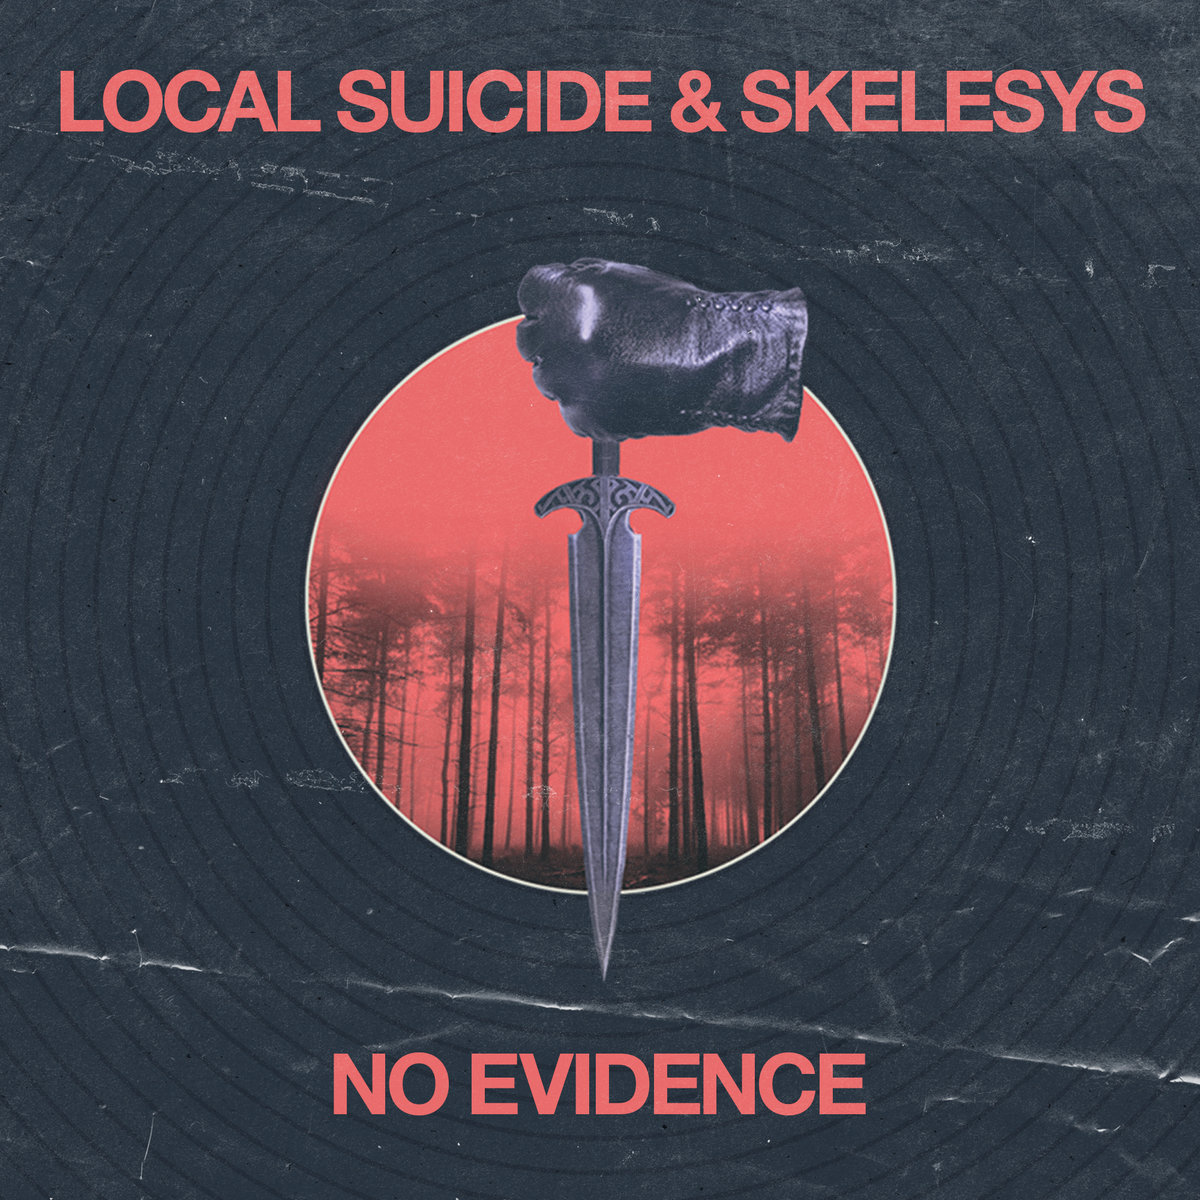 Local Suicide & Skelesys - No Evidence - Local Suicide & Skelesys - No Evidence